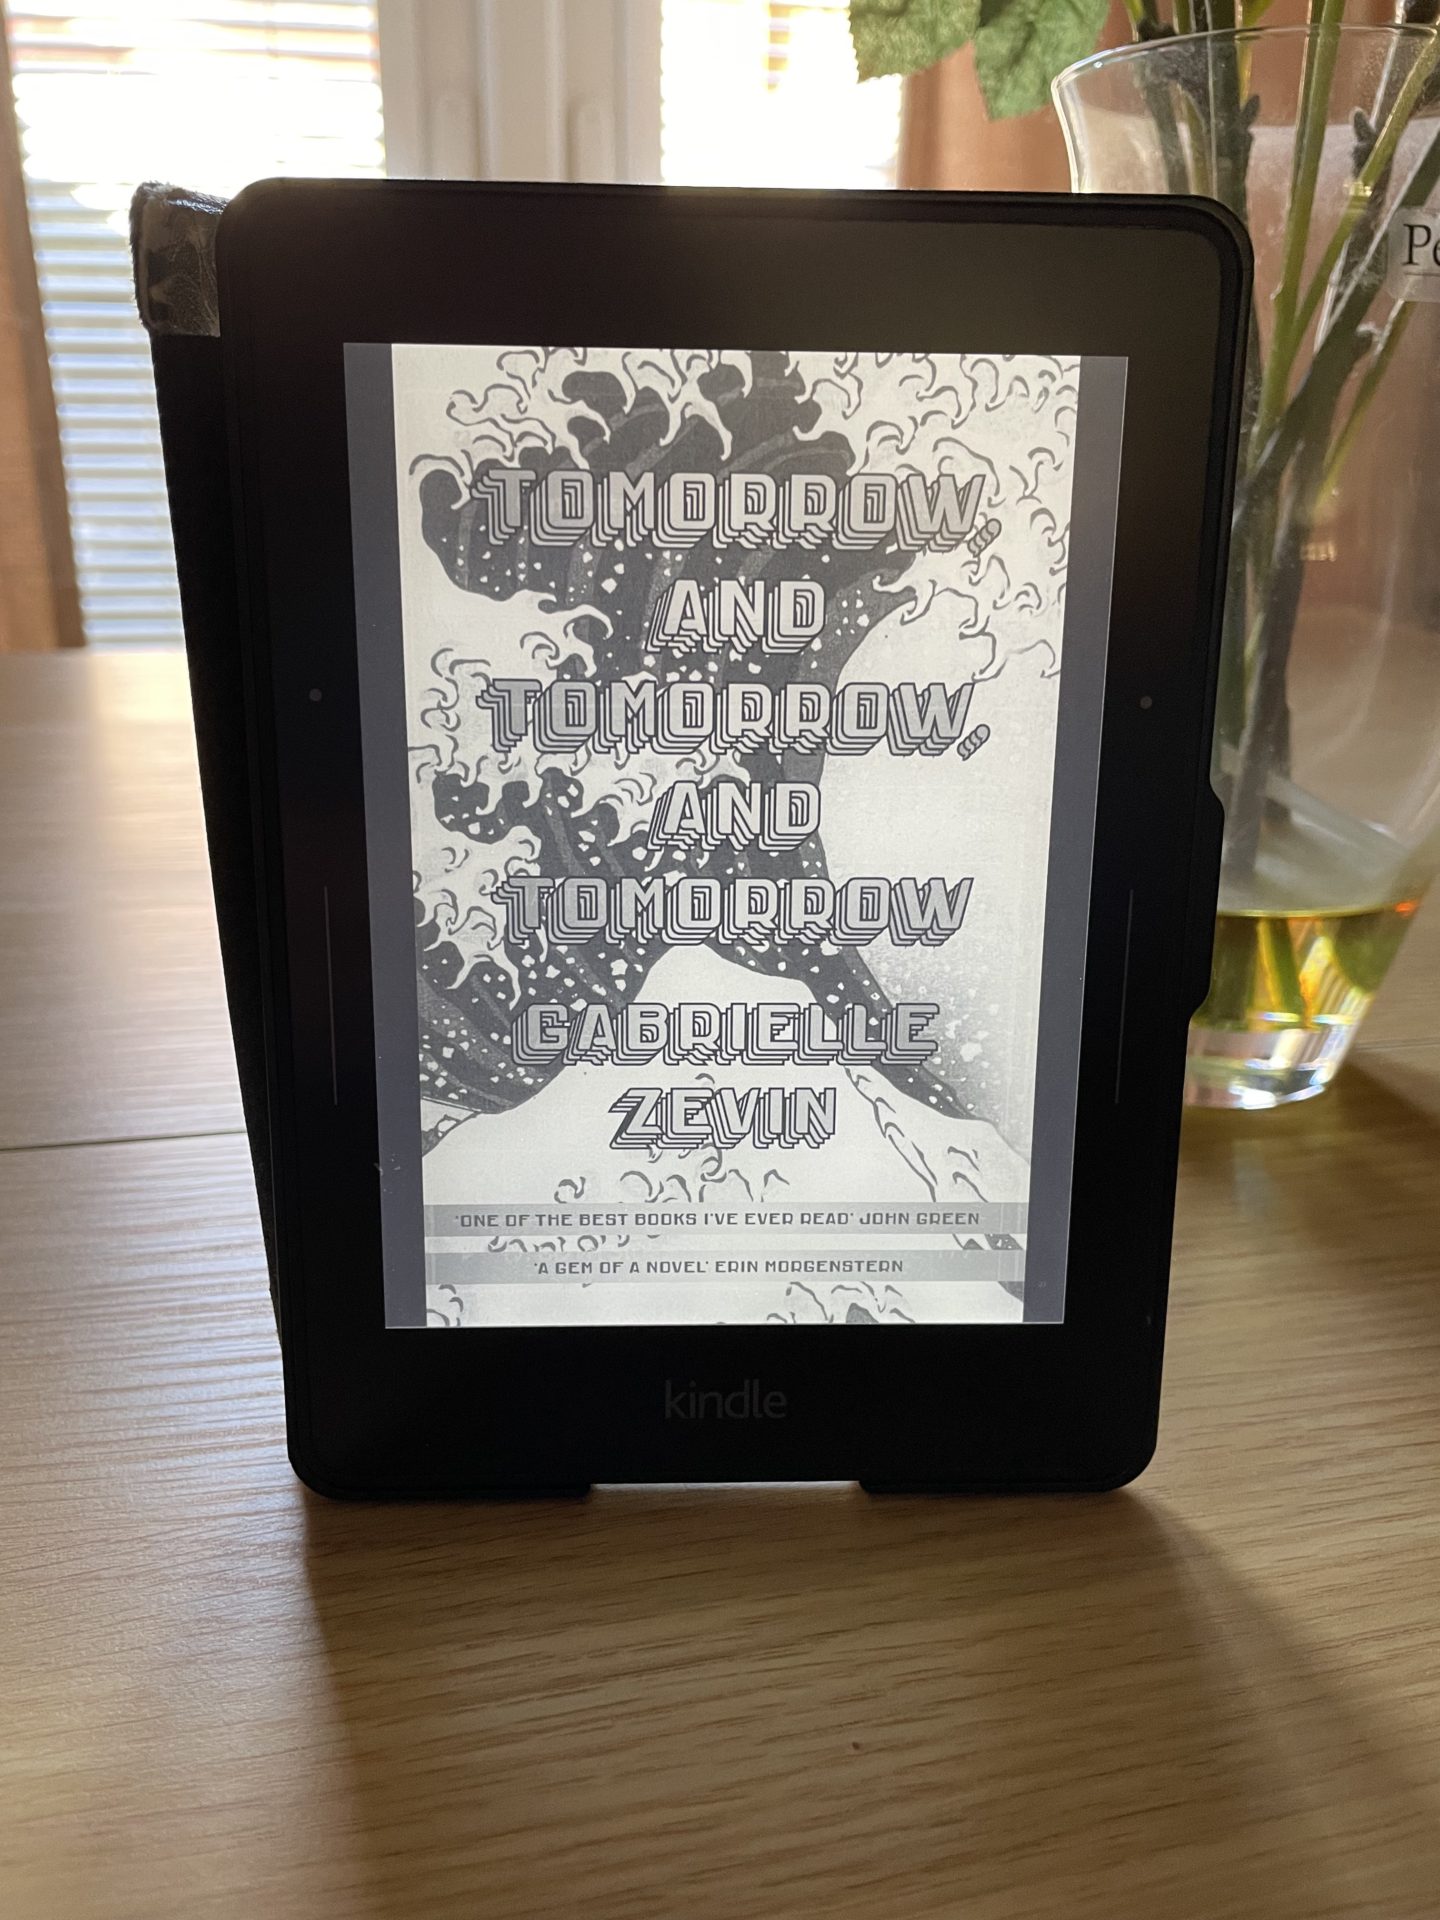 Novel about chronic illness: Tomorrow and Tomorrow and Tomorrow by Gabrielle Zevin